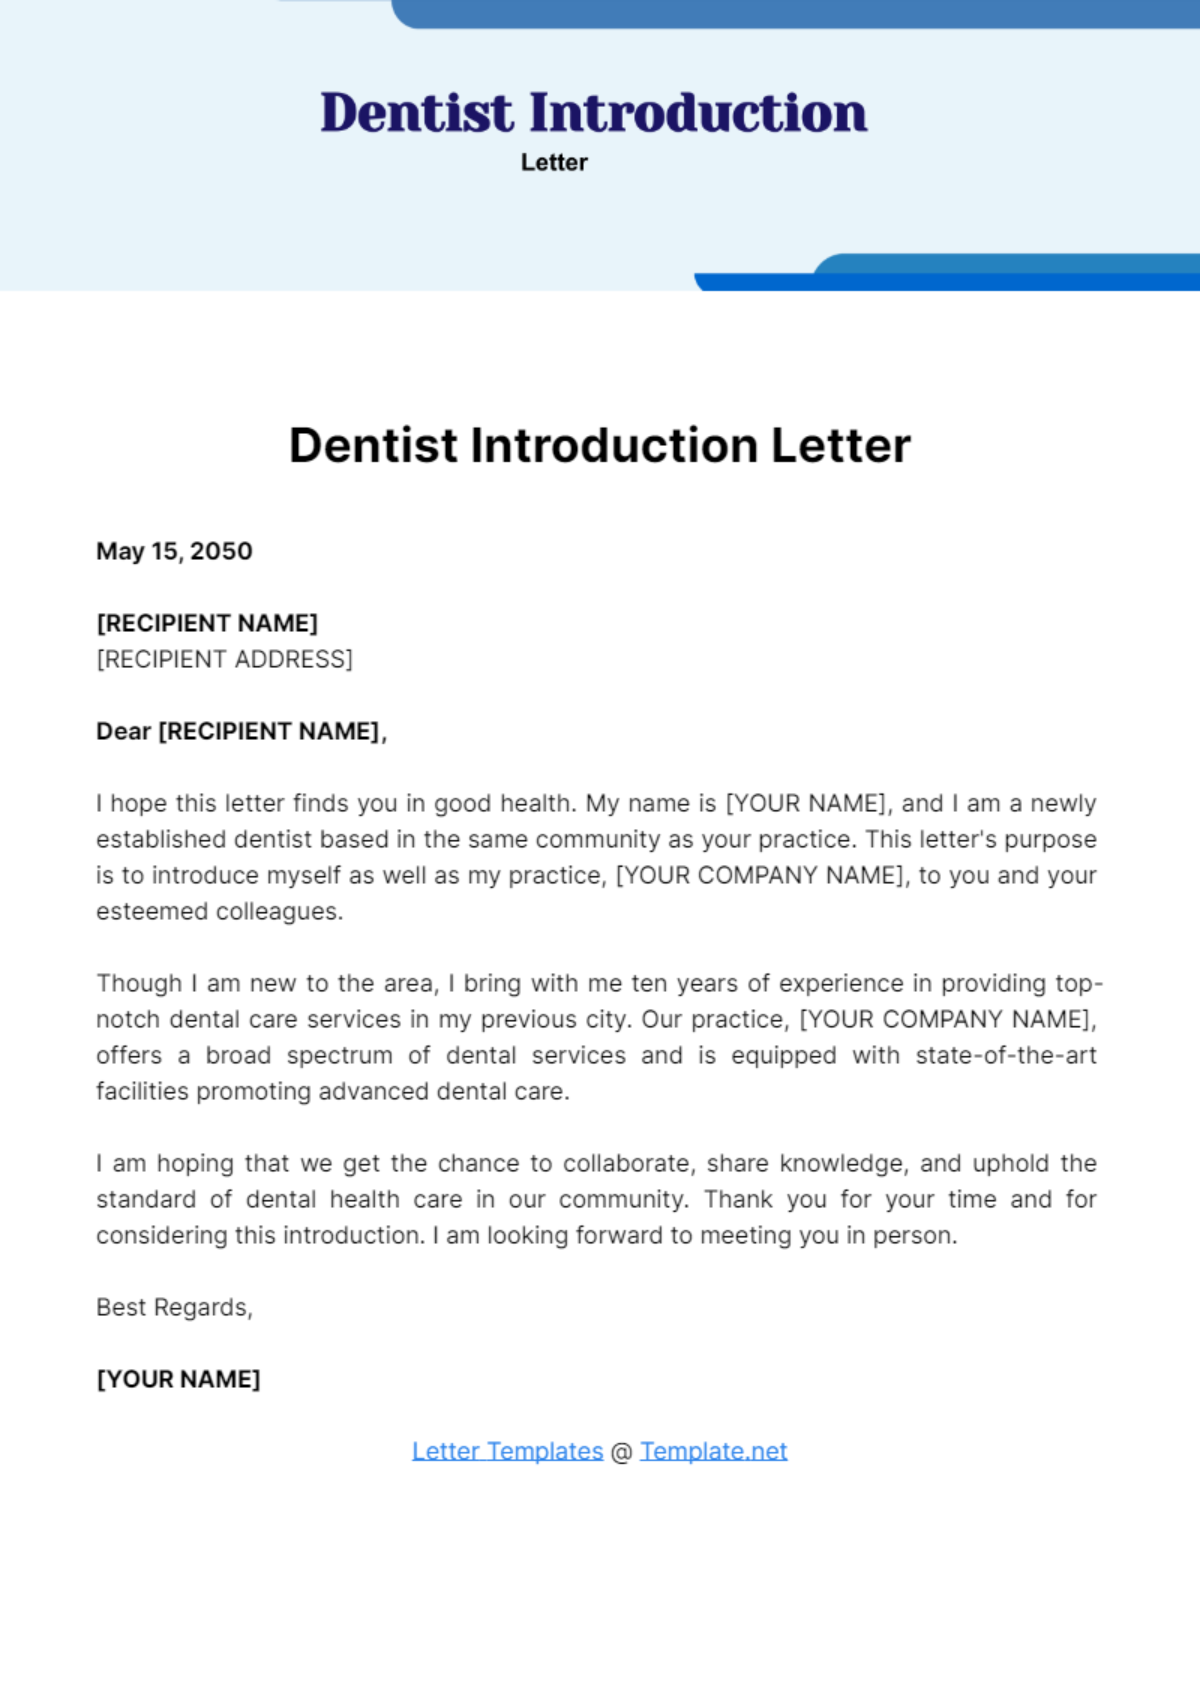 Free Dentist Introduction Letter Template